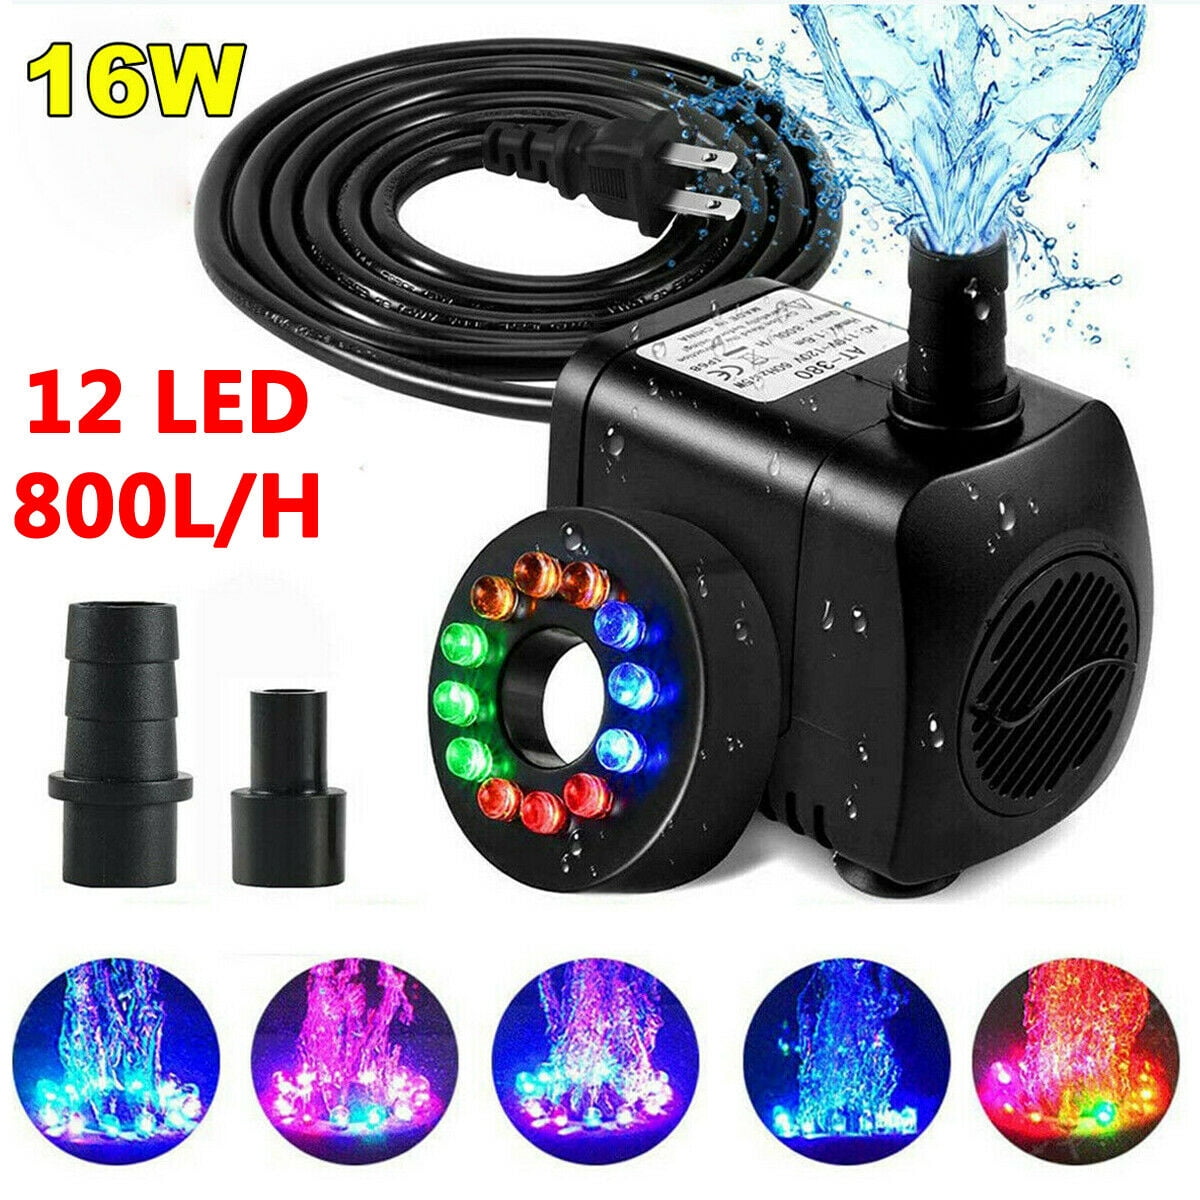 15W Submersible Water Pump with 12 LED Light for Fountain Pool Garden Pond Fish 